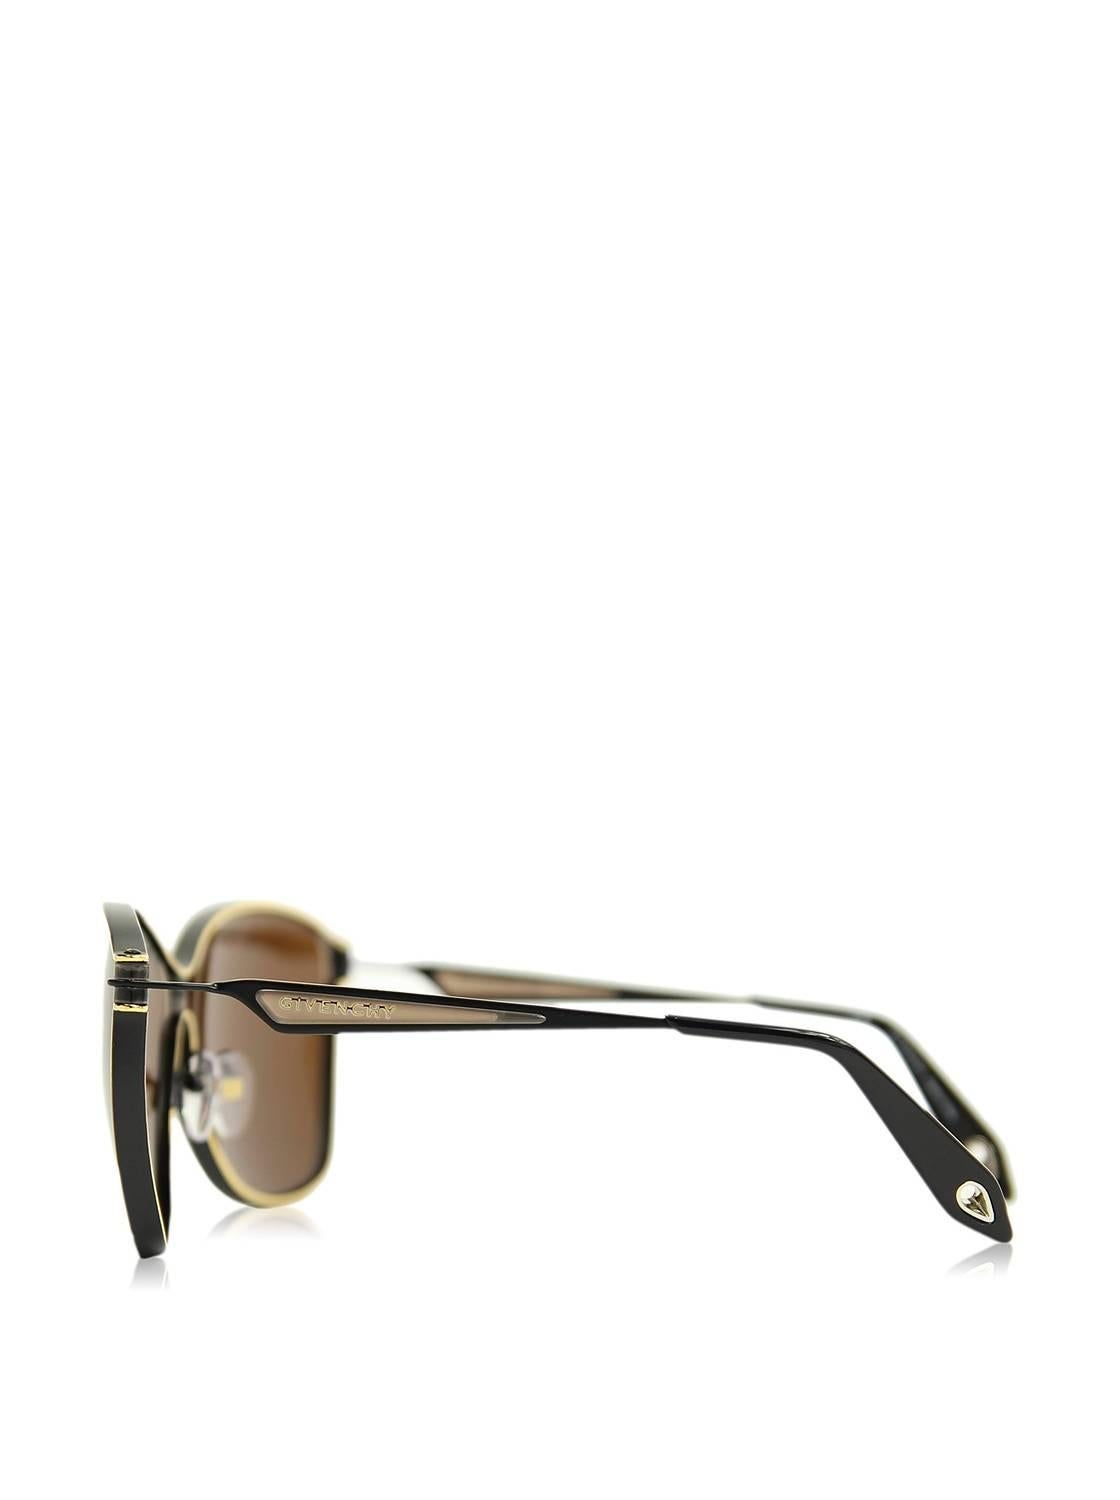 Givenchy SGVA52 0305 (Black - Gold with Brown lenses) In New Condition For Sale In Los Angeles, CA